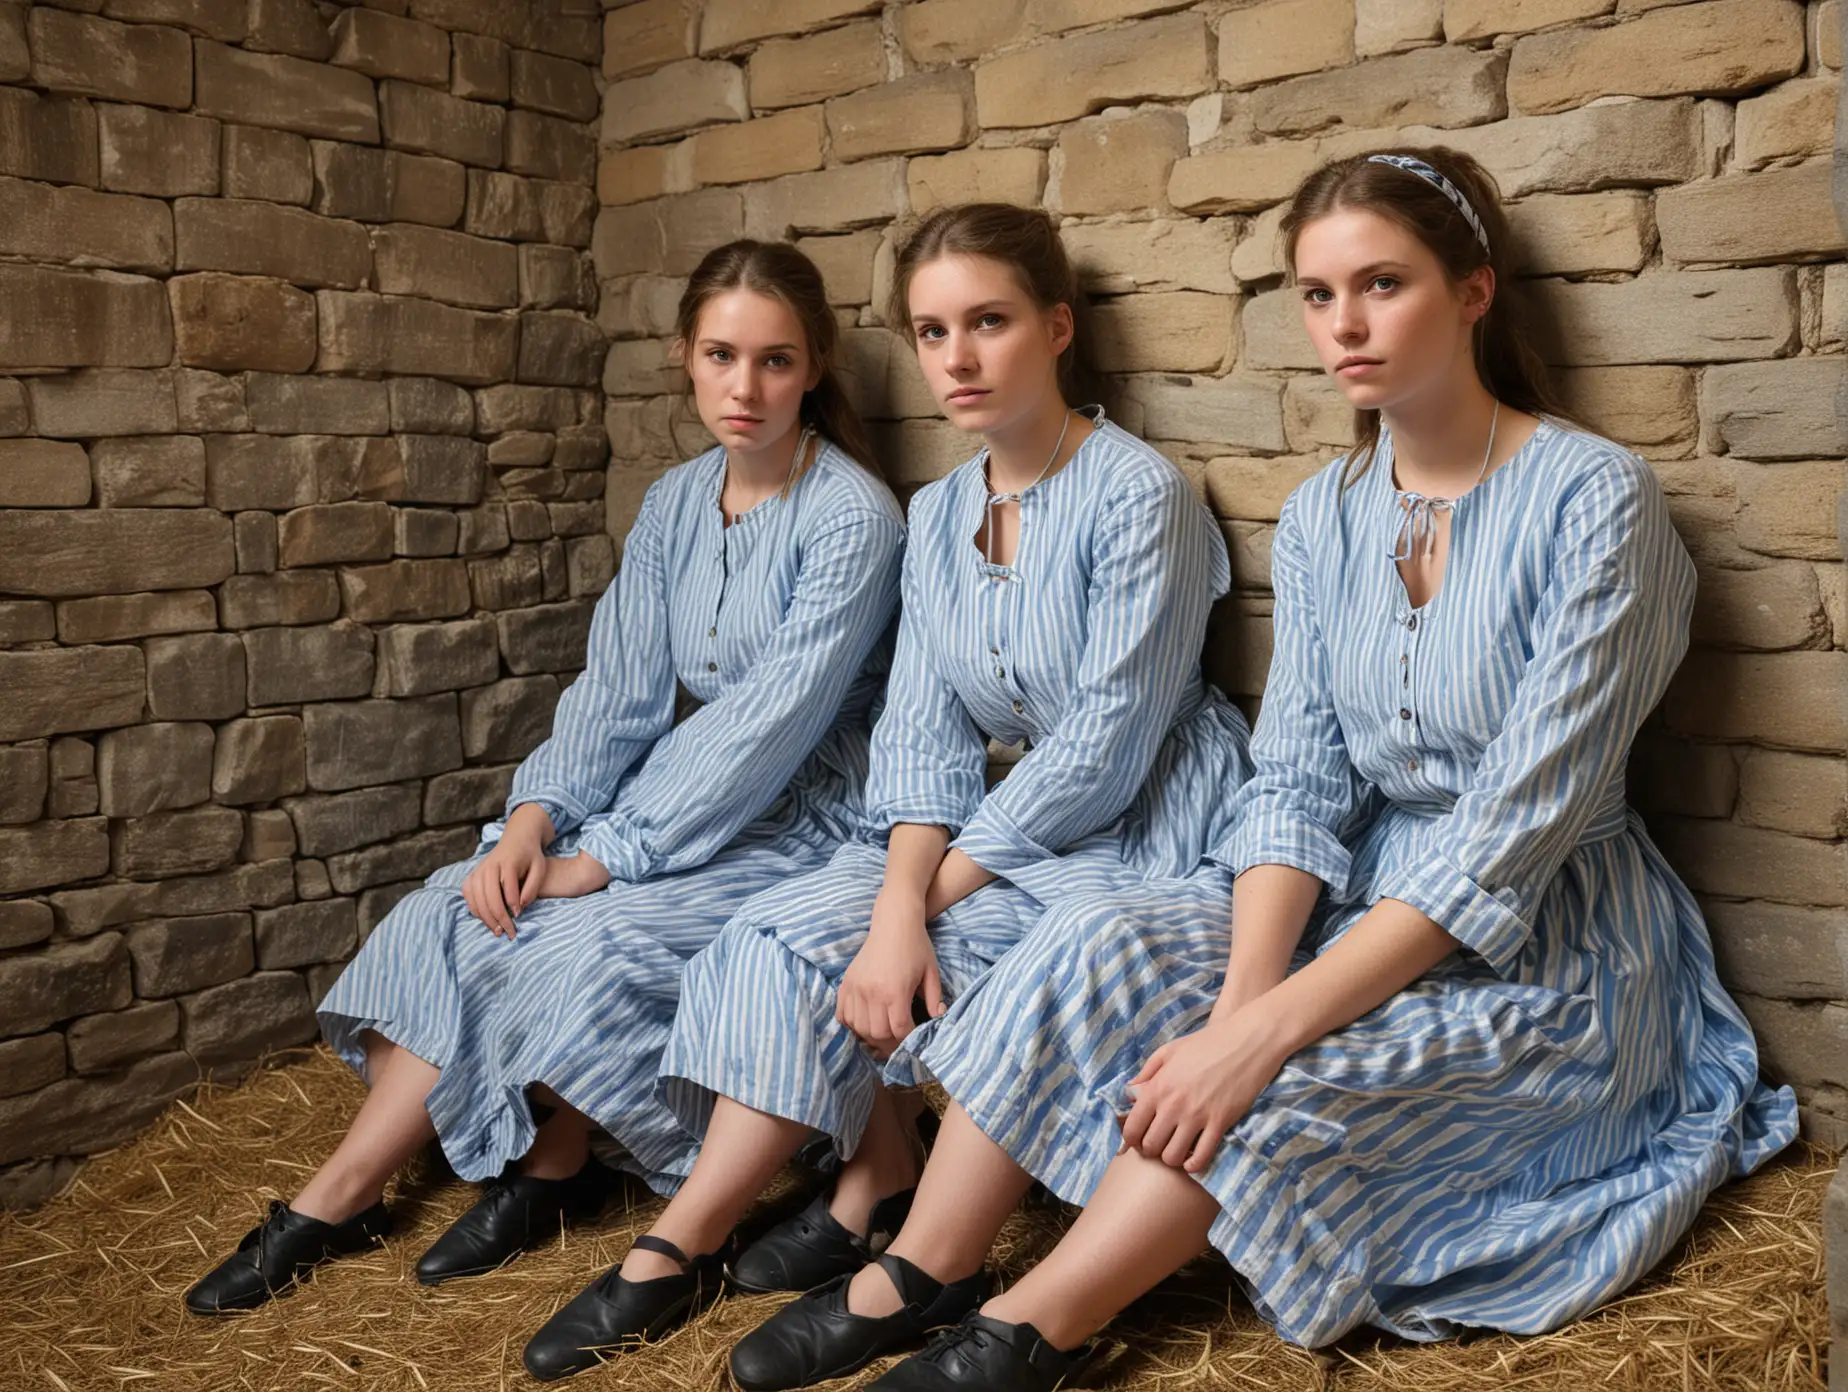 two busty female prisoners (german, 20 years old, everybody in same dress) sit on hay on the ground at a wall in a dark dungeoncell (stone walls, small barred window, 1800s) in worn blue-white vertical wide-striped buttoned longsleeve collarless prisonerdress( round-neckline, tied back hair), head to knee view, She is shamed and desperate